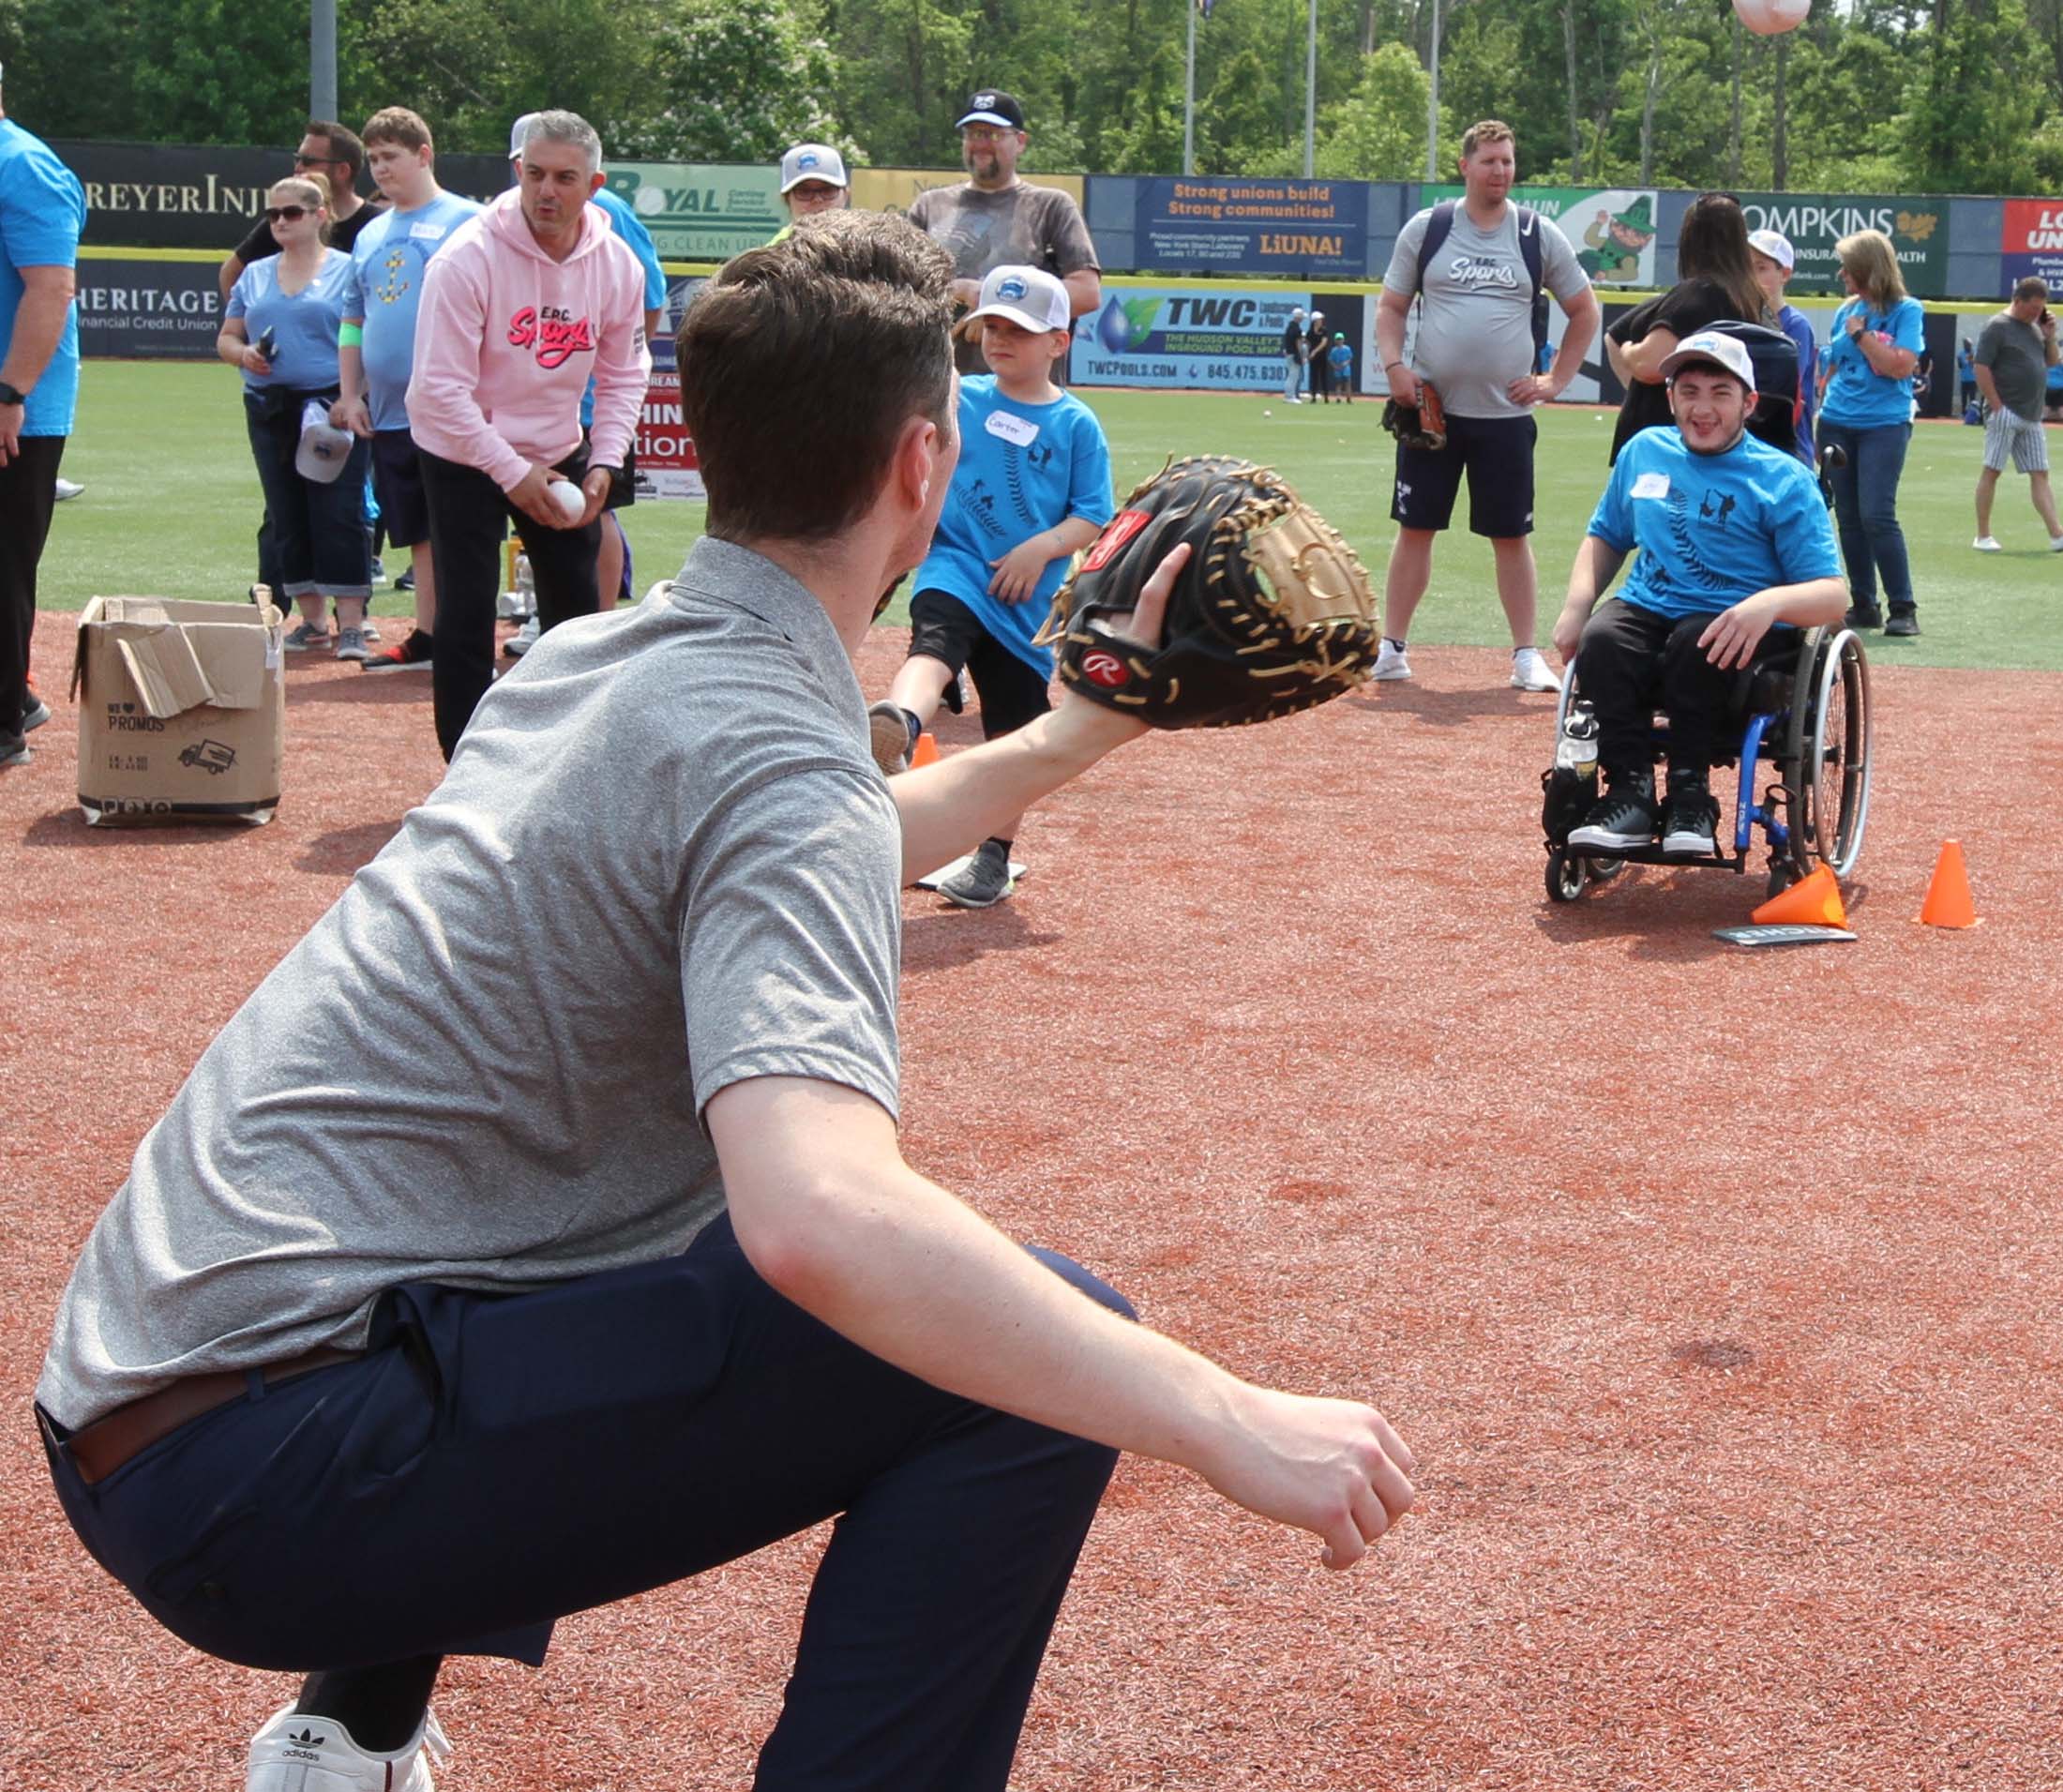 Participants throw baseballs to Hudson Valley Renegades Players. In this picture a youngster is partially hidden by a HV Renegades player, but he is in the motion of throwing a baseball, while another young man, who is seated in wheelchair, has already thrown the ball to the HV Renegades player as the ball is in the air between the two of them. Disability, Dream and Do (also known as D3 Day) at Heritage Financial Field, June 17, 2023